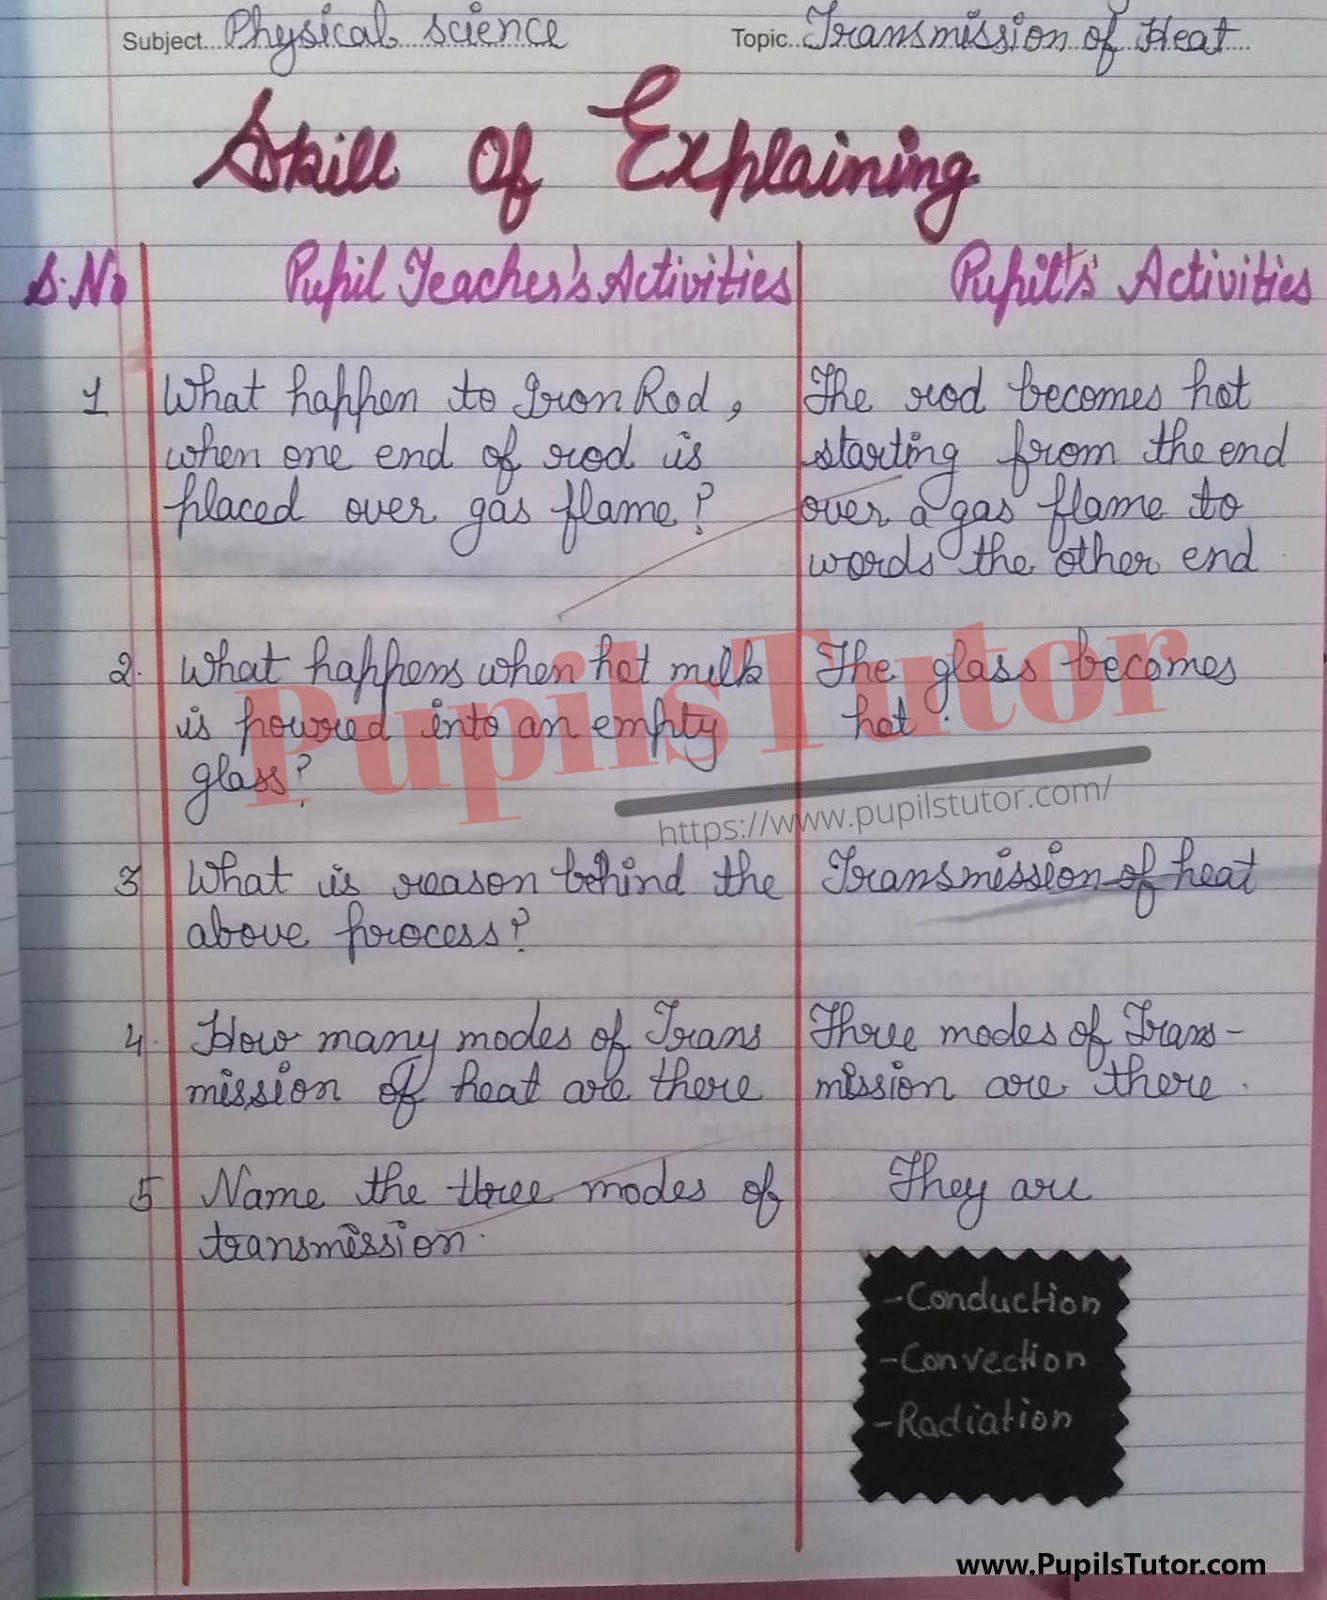 Microteaching Skill Of Explanation Science Lesson Plan For Class 6 To 9 On Modes Of Heat Transmission – (Page And Image Number 1) – Pupils Tutor